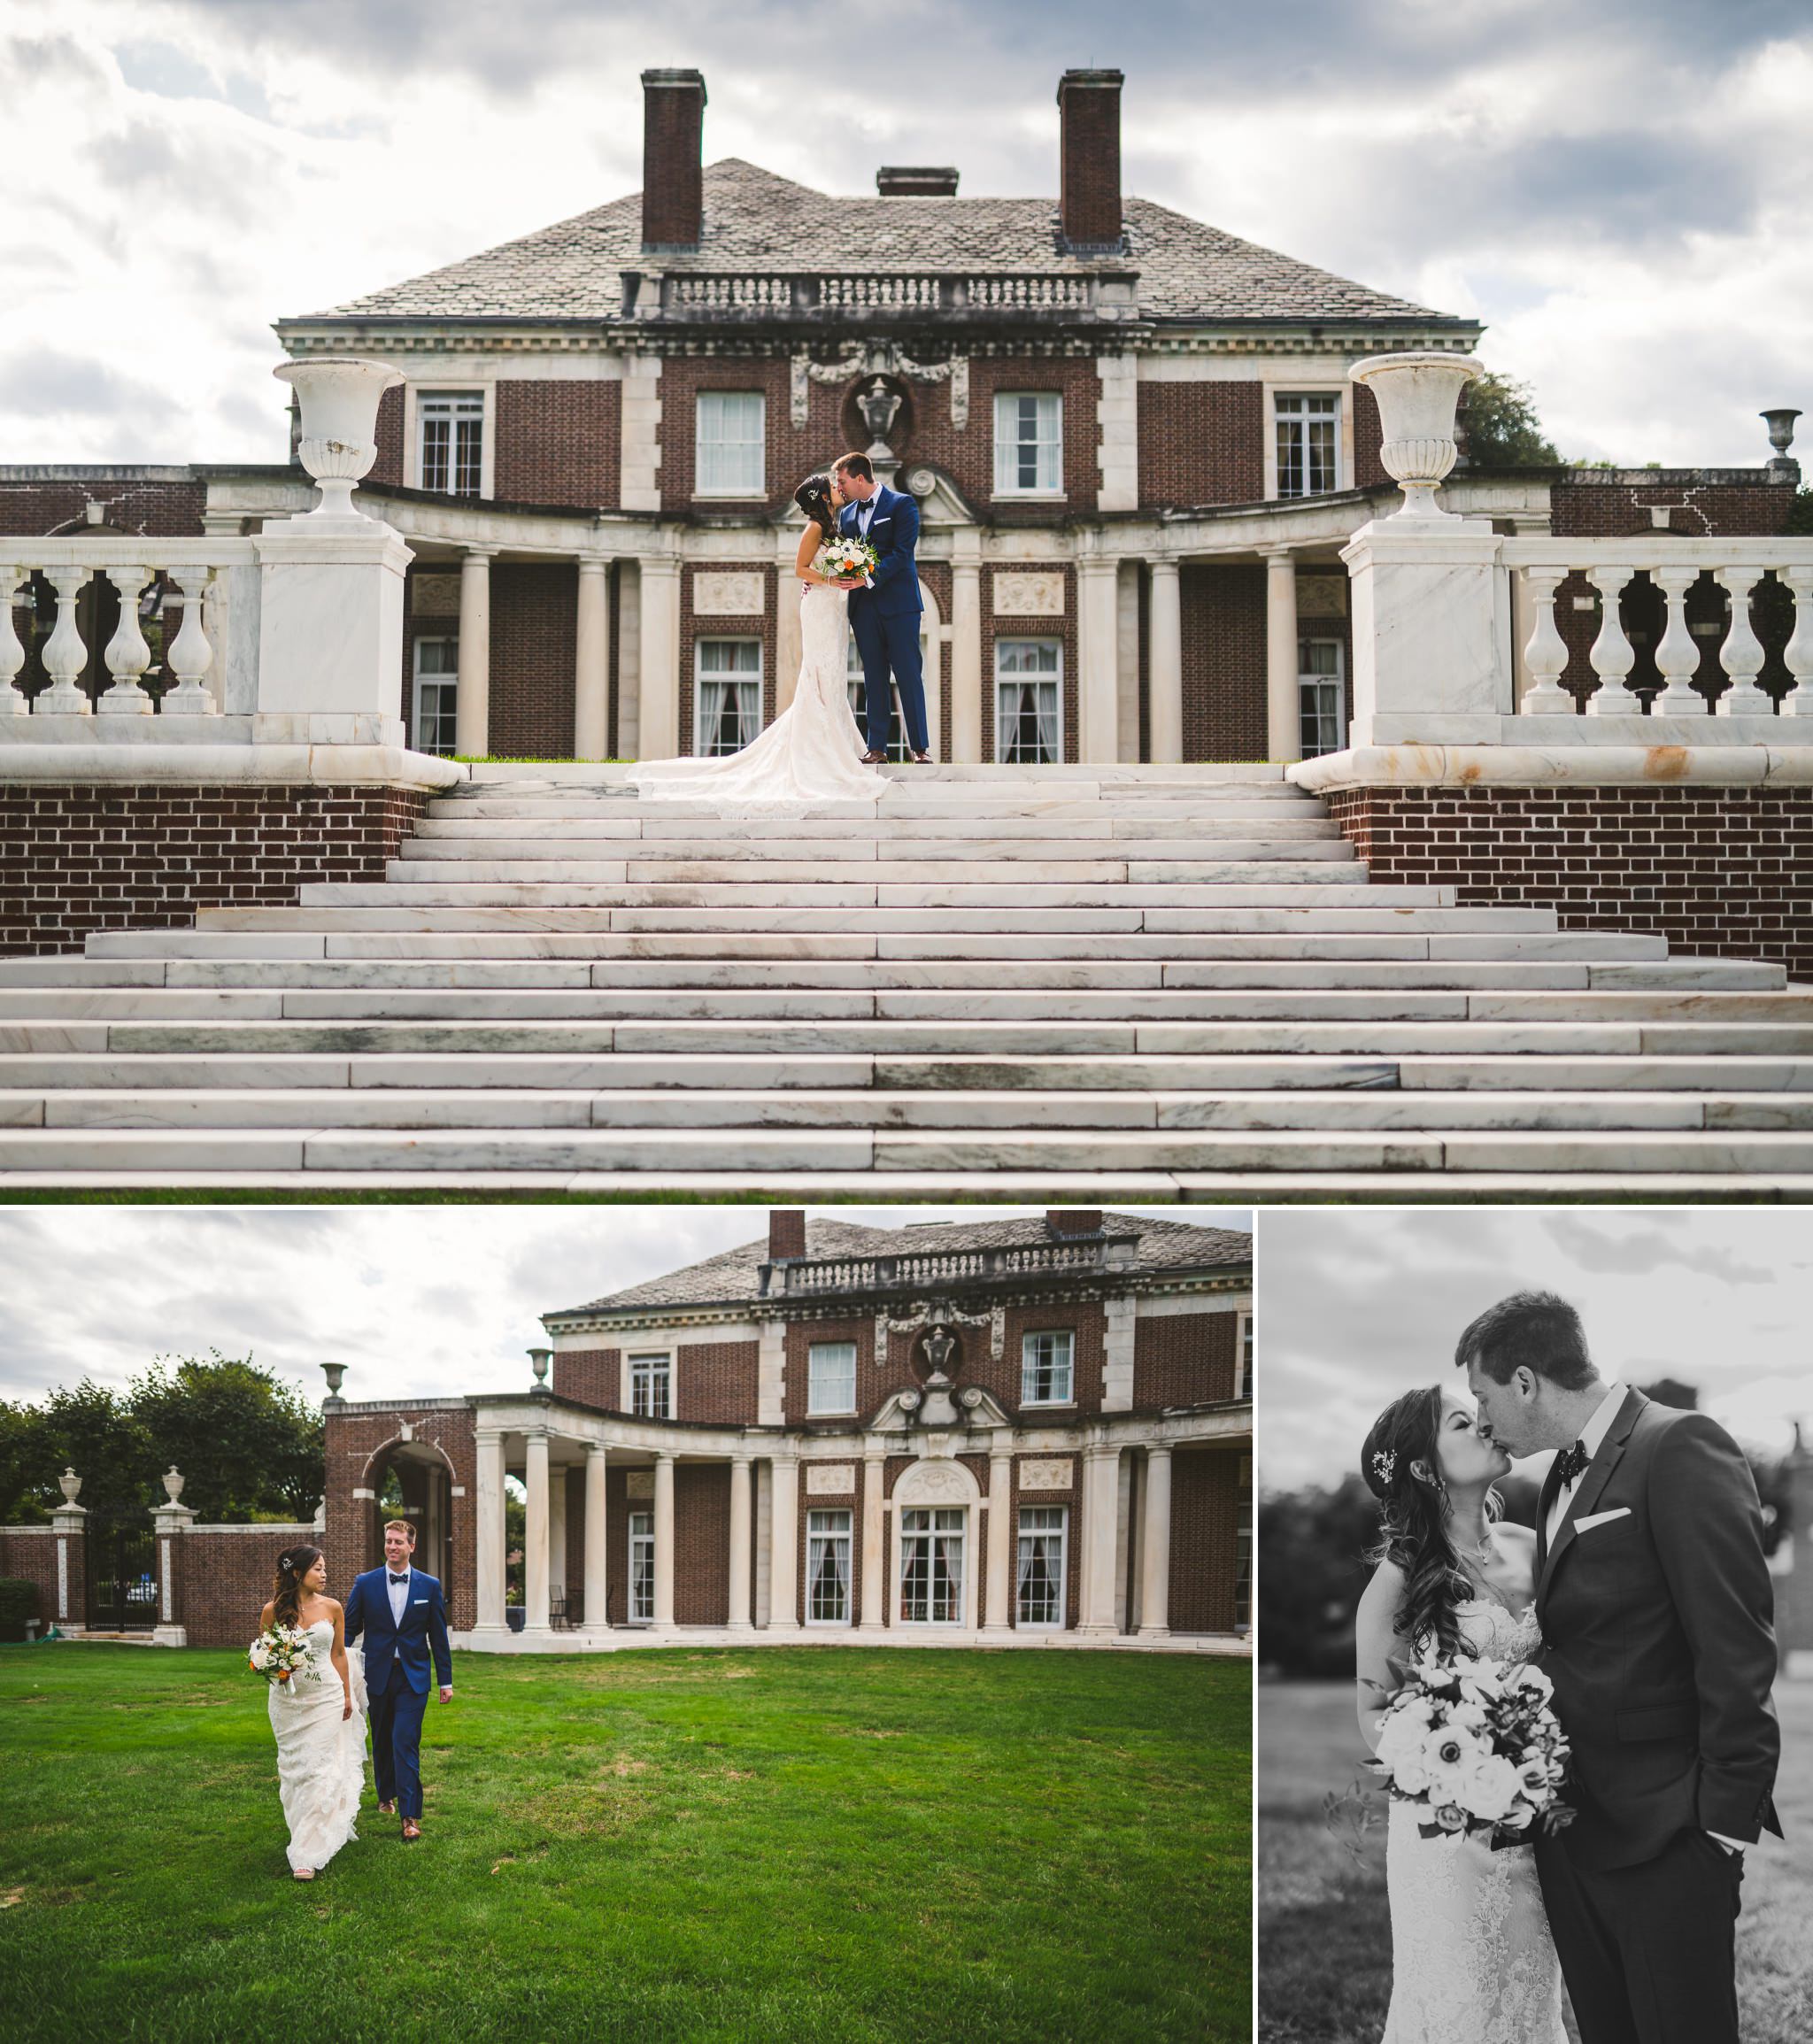  We will set up a few formal photographs to get the hero image that they will love, but other than that, the rest of the day is photojournalism and storytelling.

Scenes from Lisa and Colin's Long Island, New York Wedding at the New York Institute of